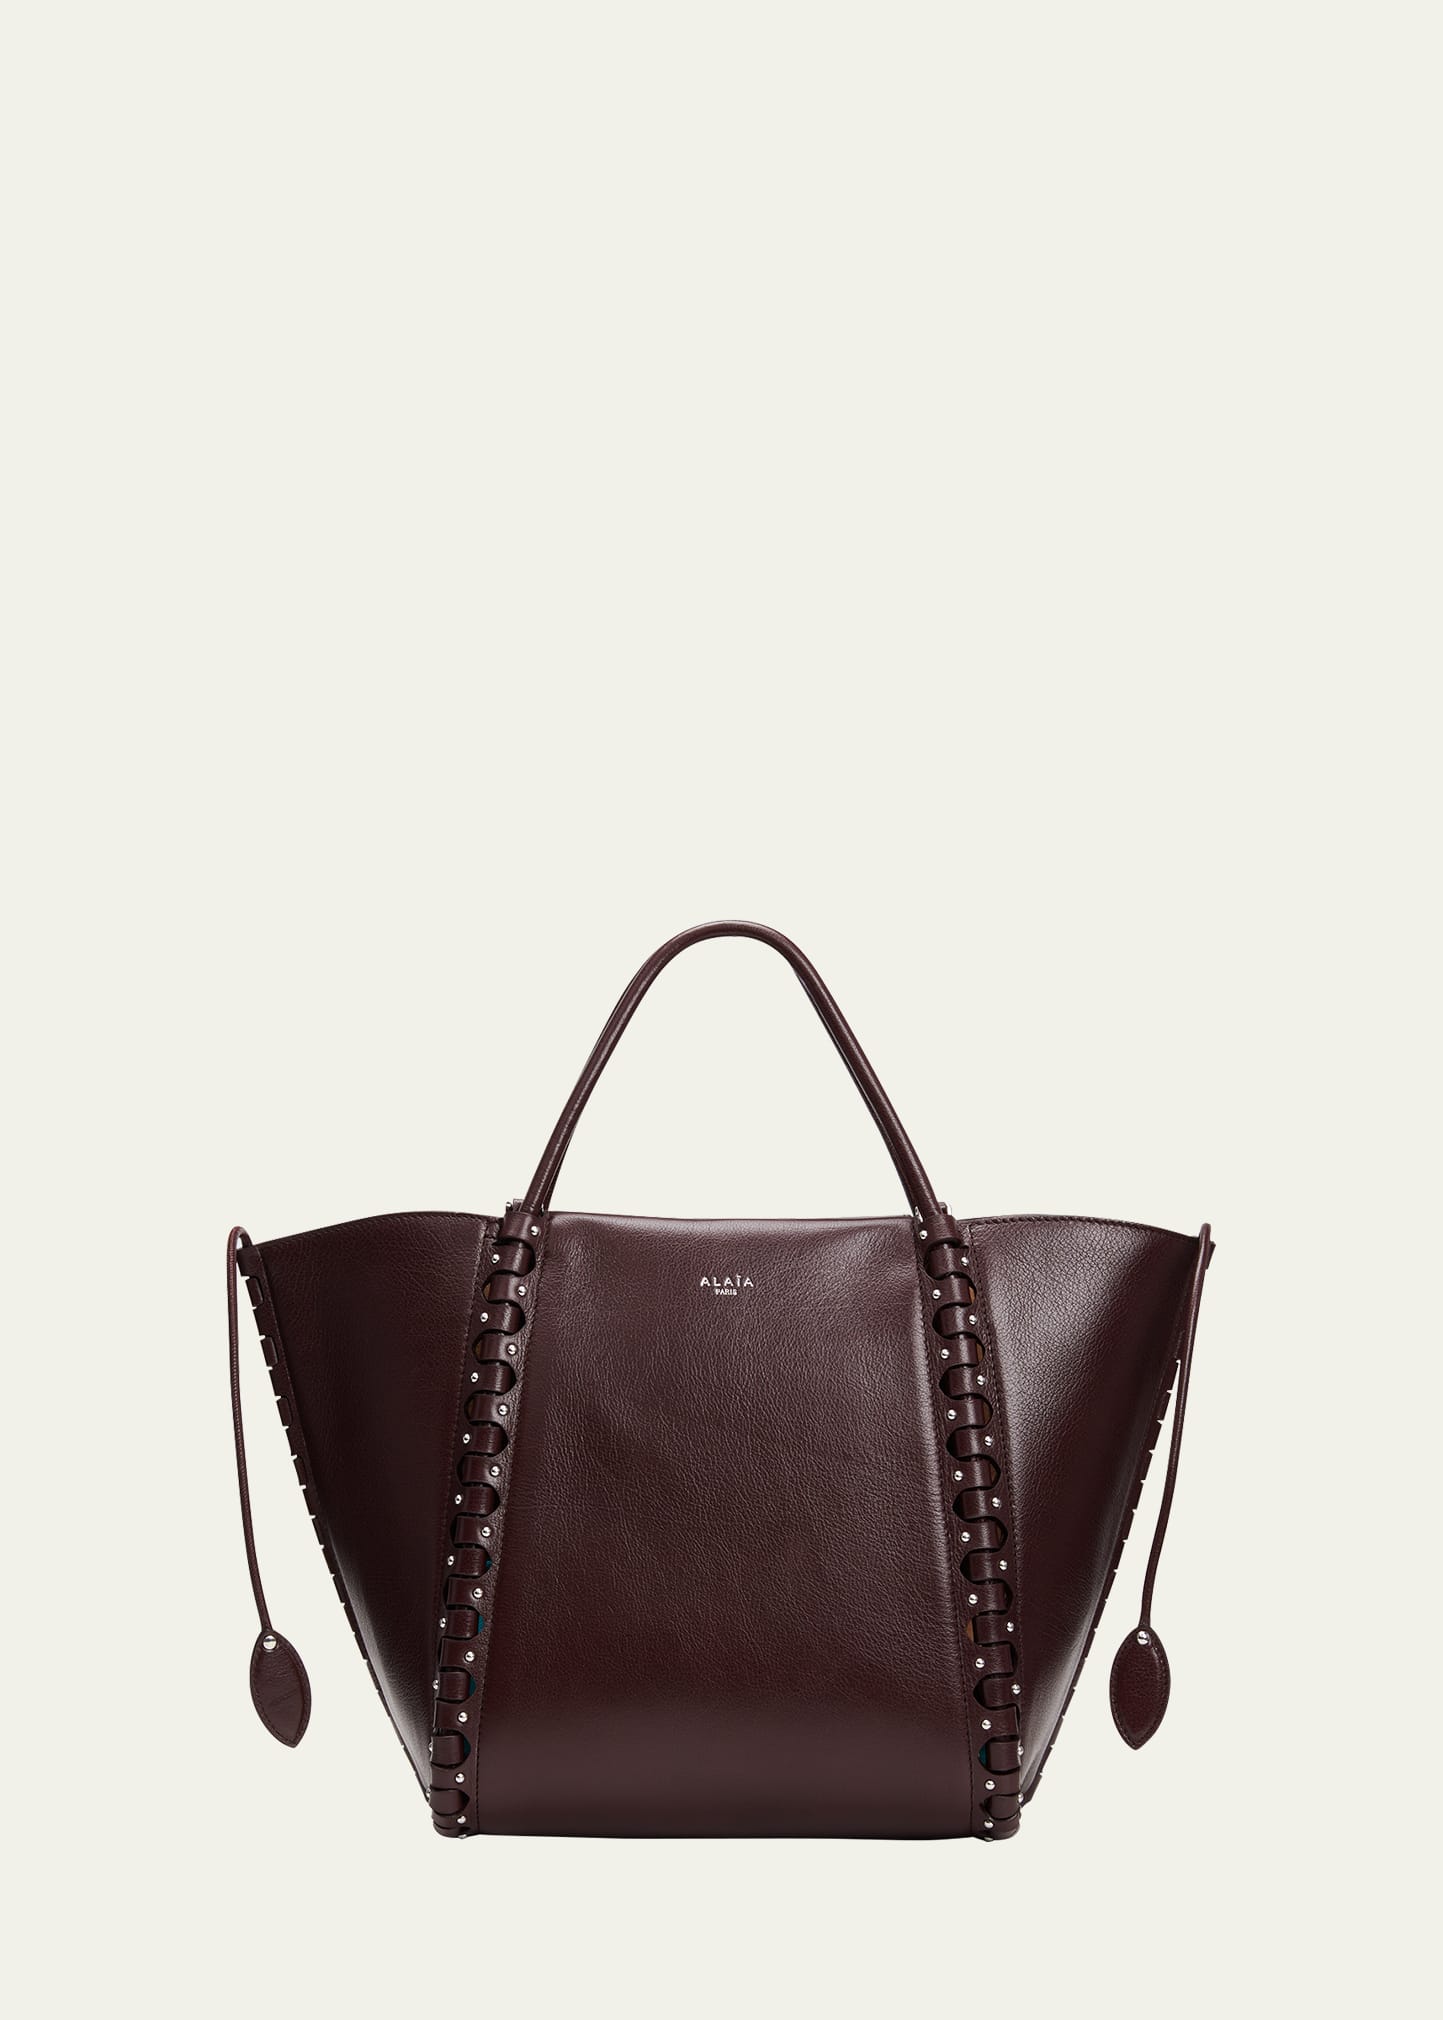 Le Hinge Small Studded Leather Tote Bag